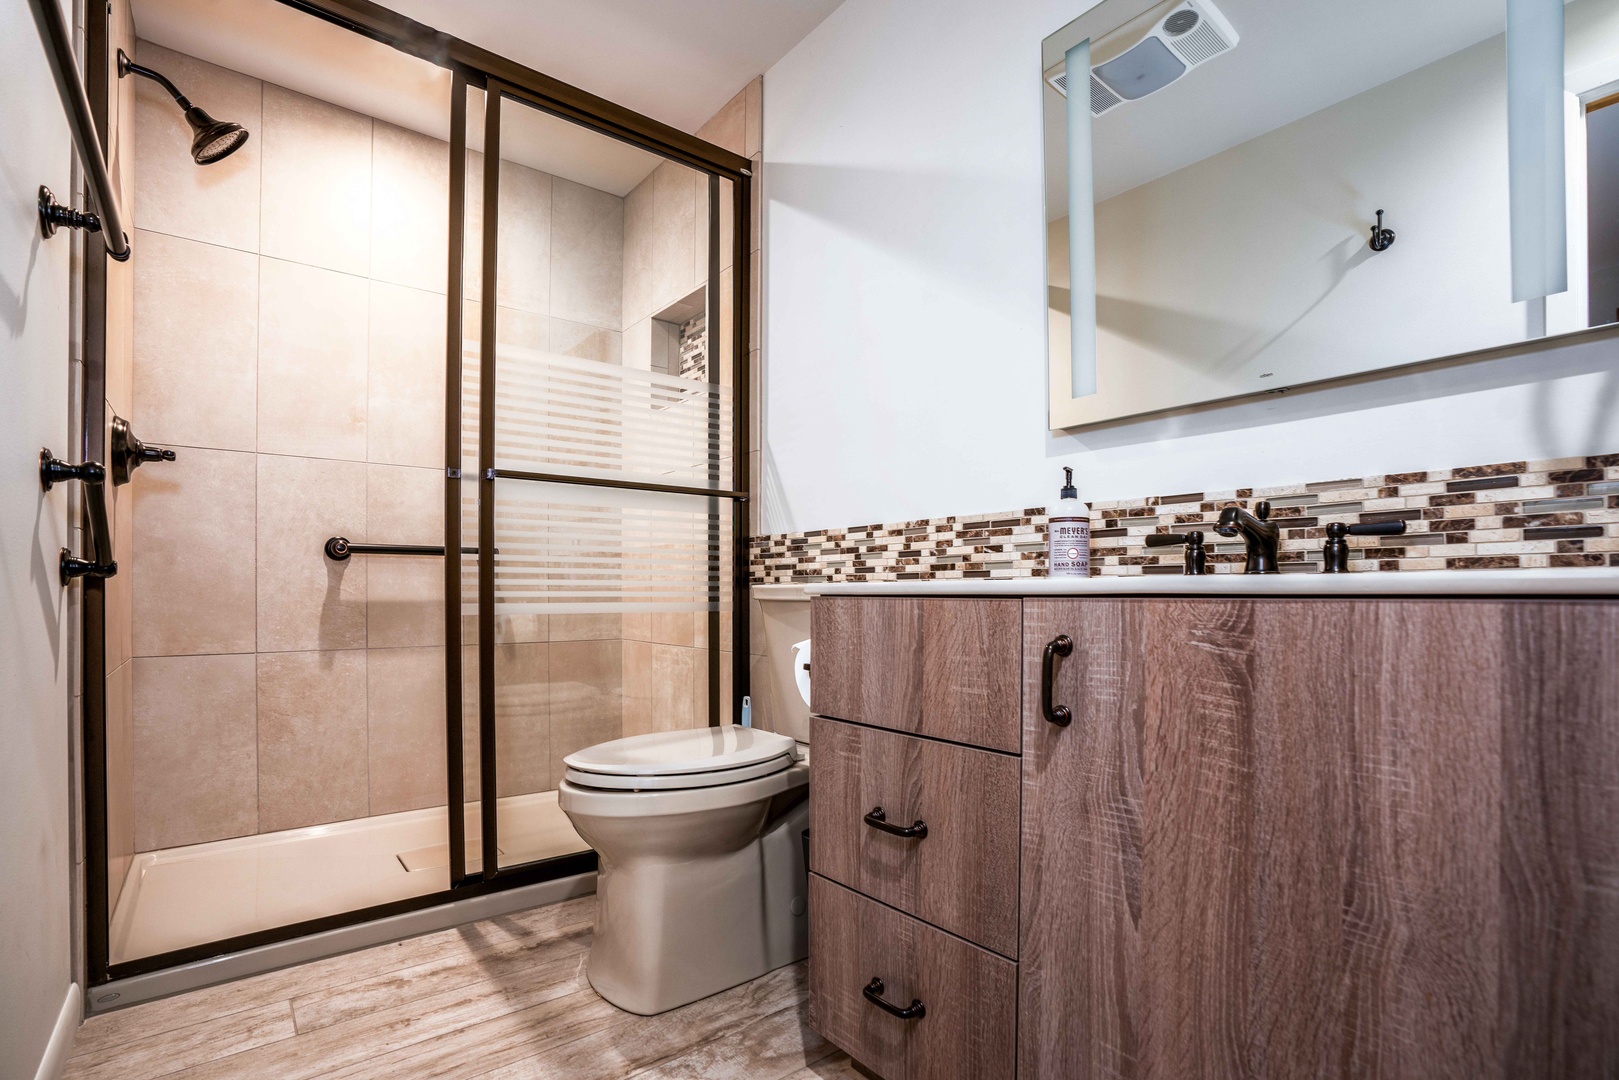 This full shared bathroom includes a single vanity & glass shower